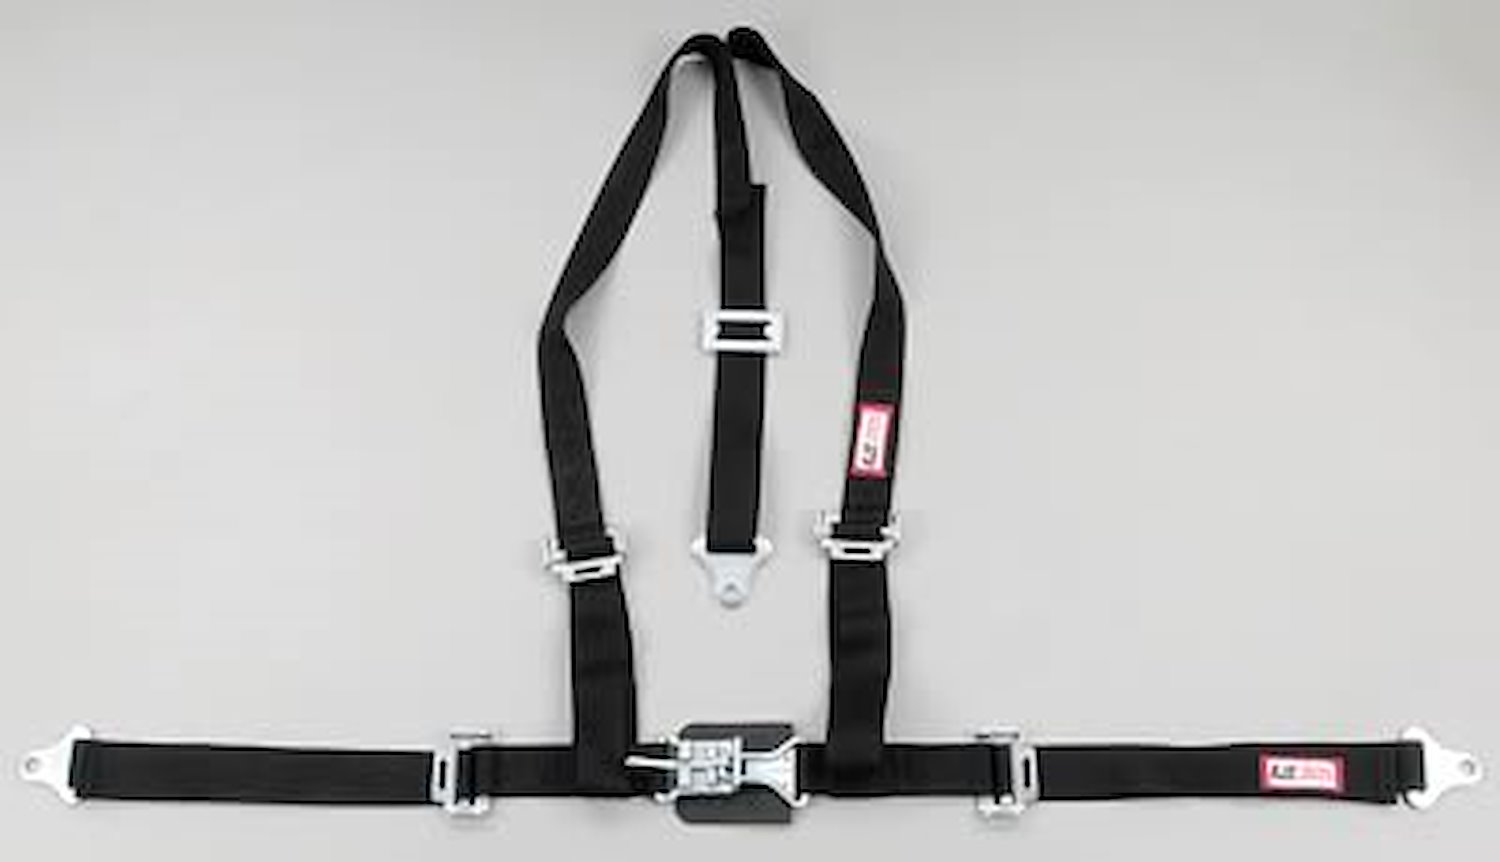 NON-SFI L&L HARNESS 2 PULL DOWN Lap Belt SEWN IN 2 S.H. Individual ROLL BAR Mount ALL WRAP ENDS RED